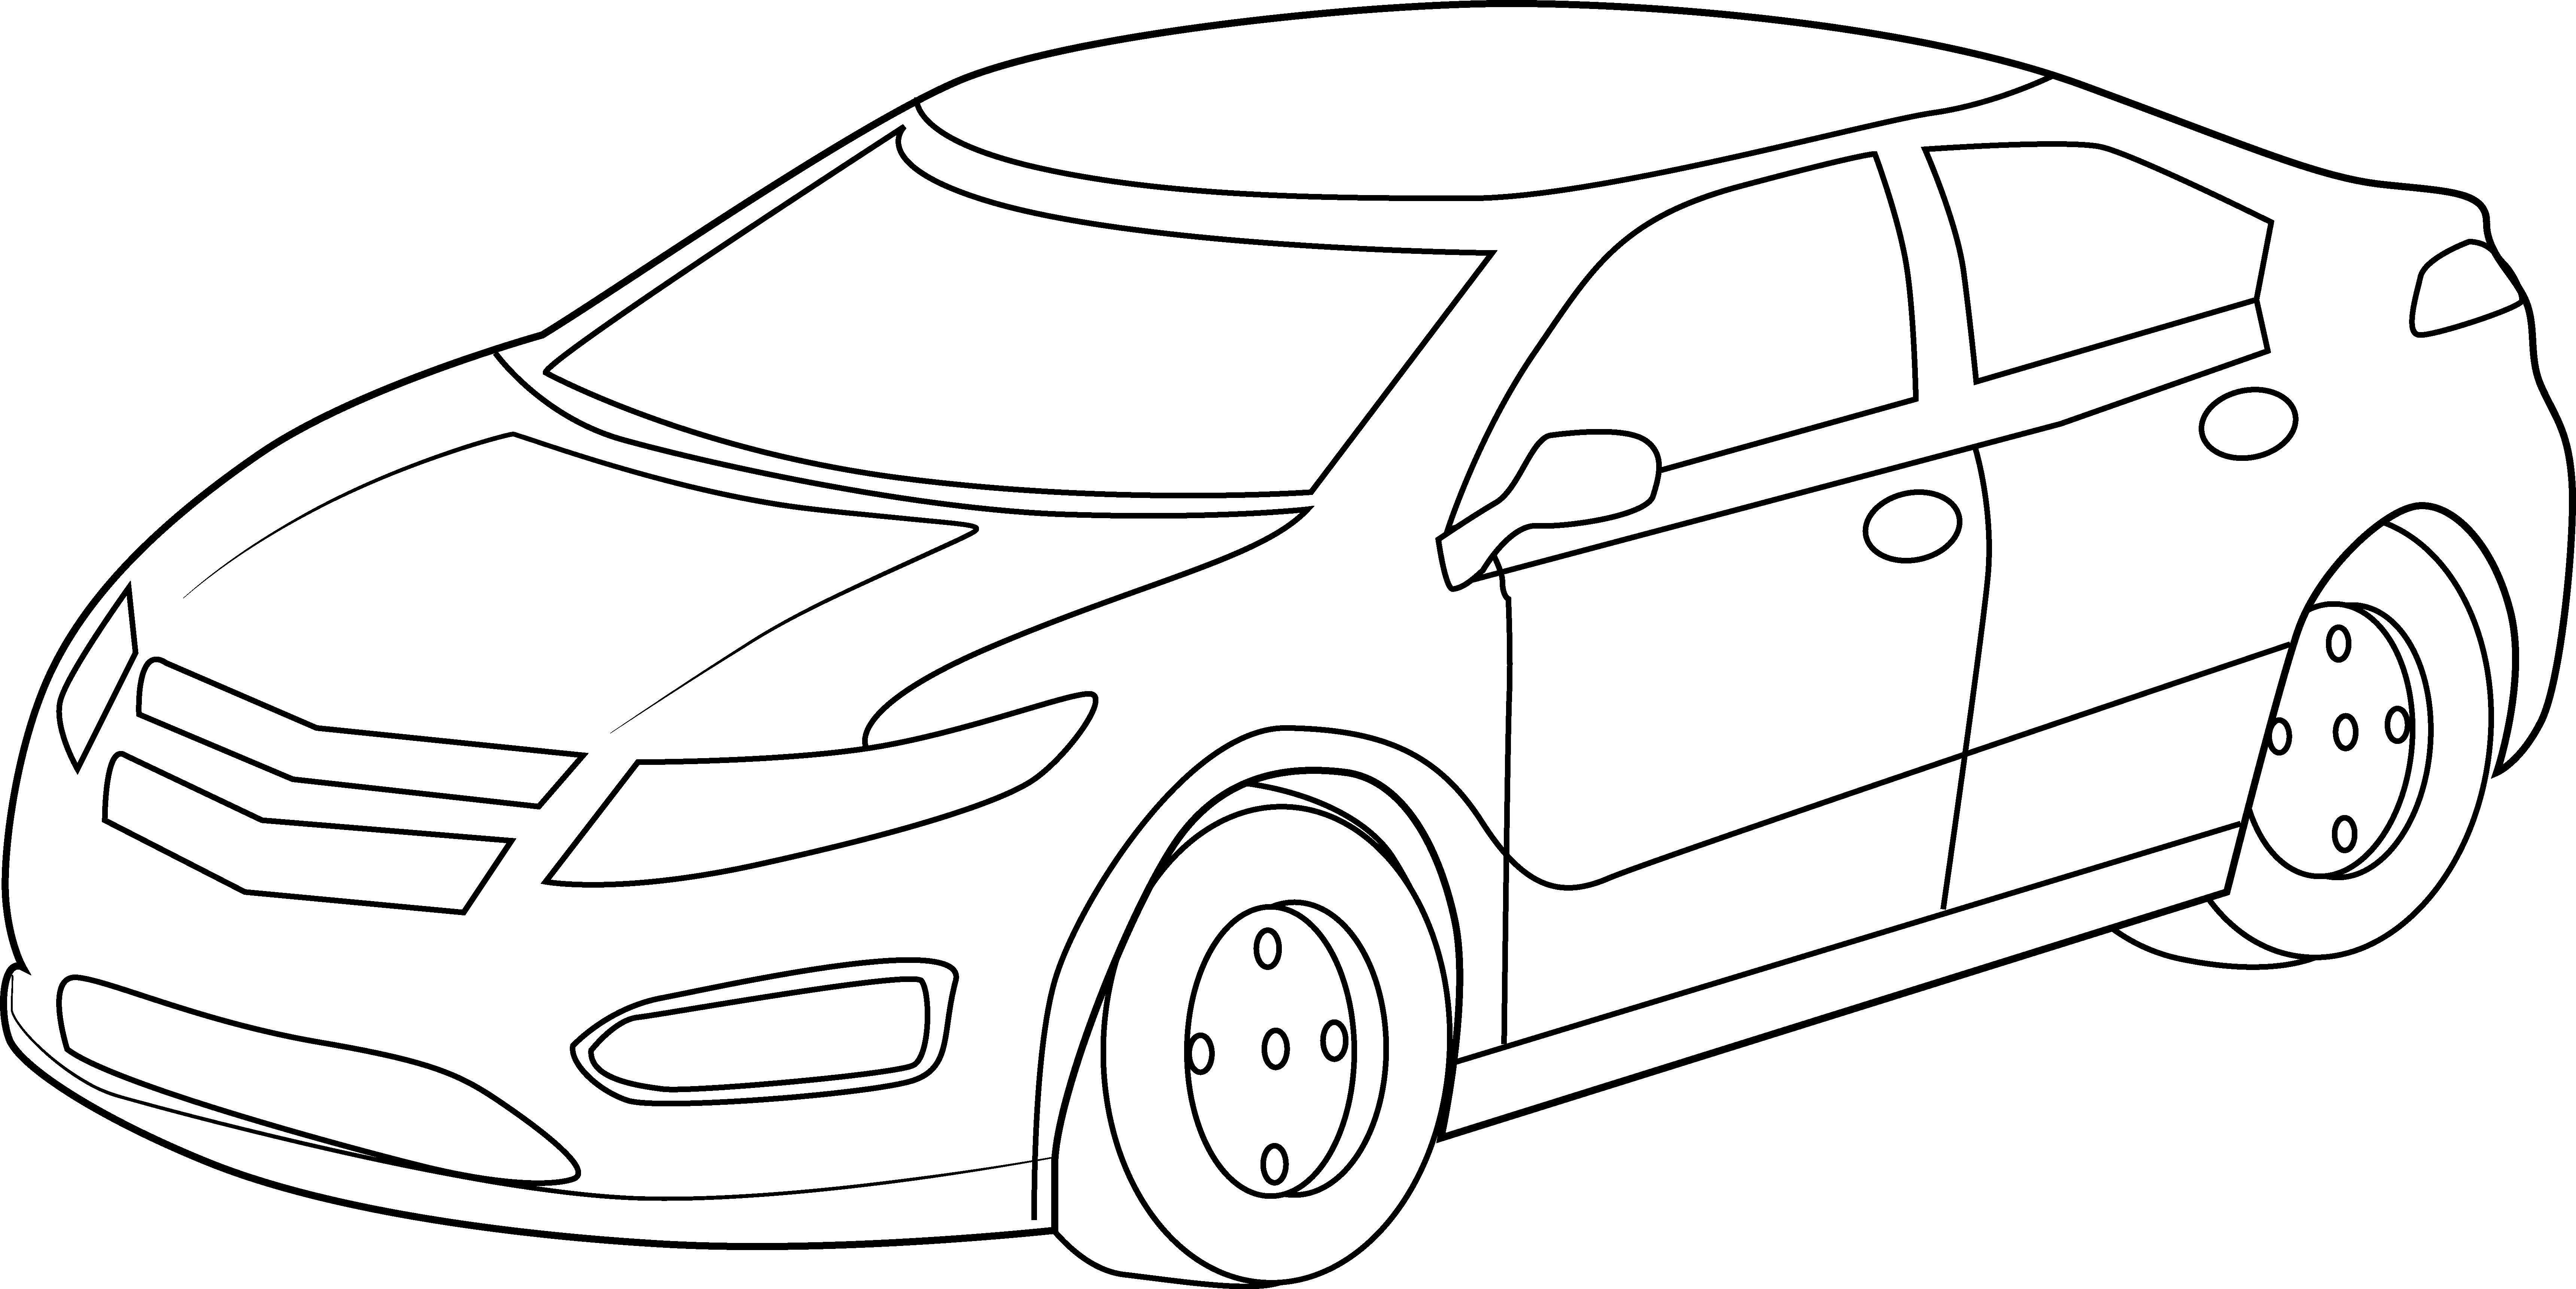 Cool Sports Car Coloring Page - Free Clip Art